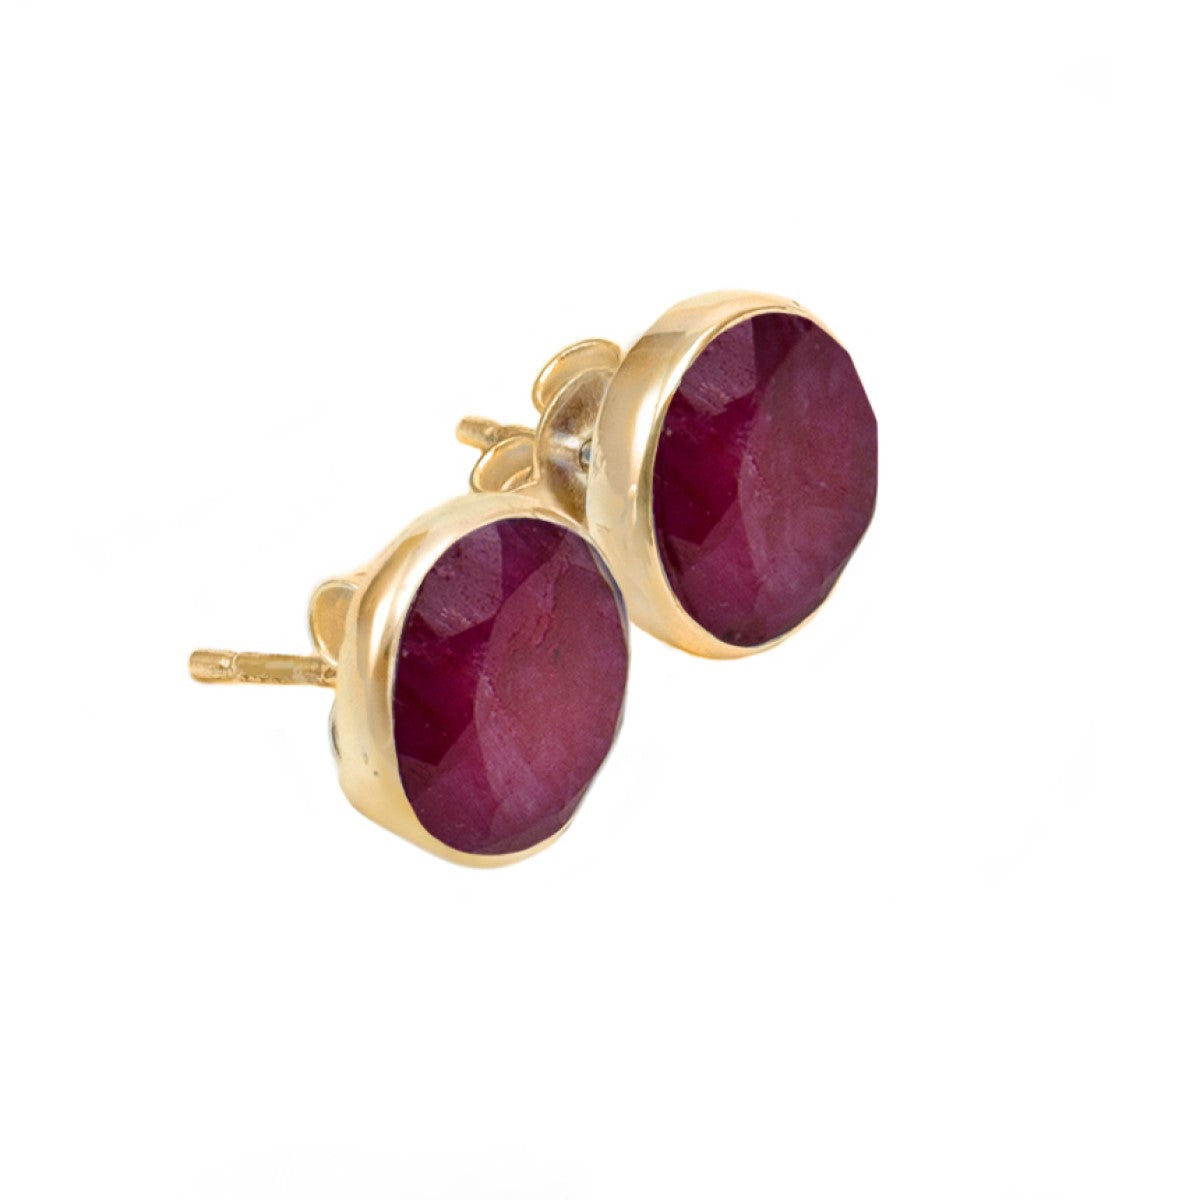 Ruby Quartz Studs in Gold Plated Sterling Silver with a Round Faceted Gemstone